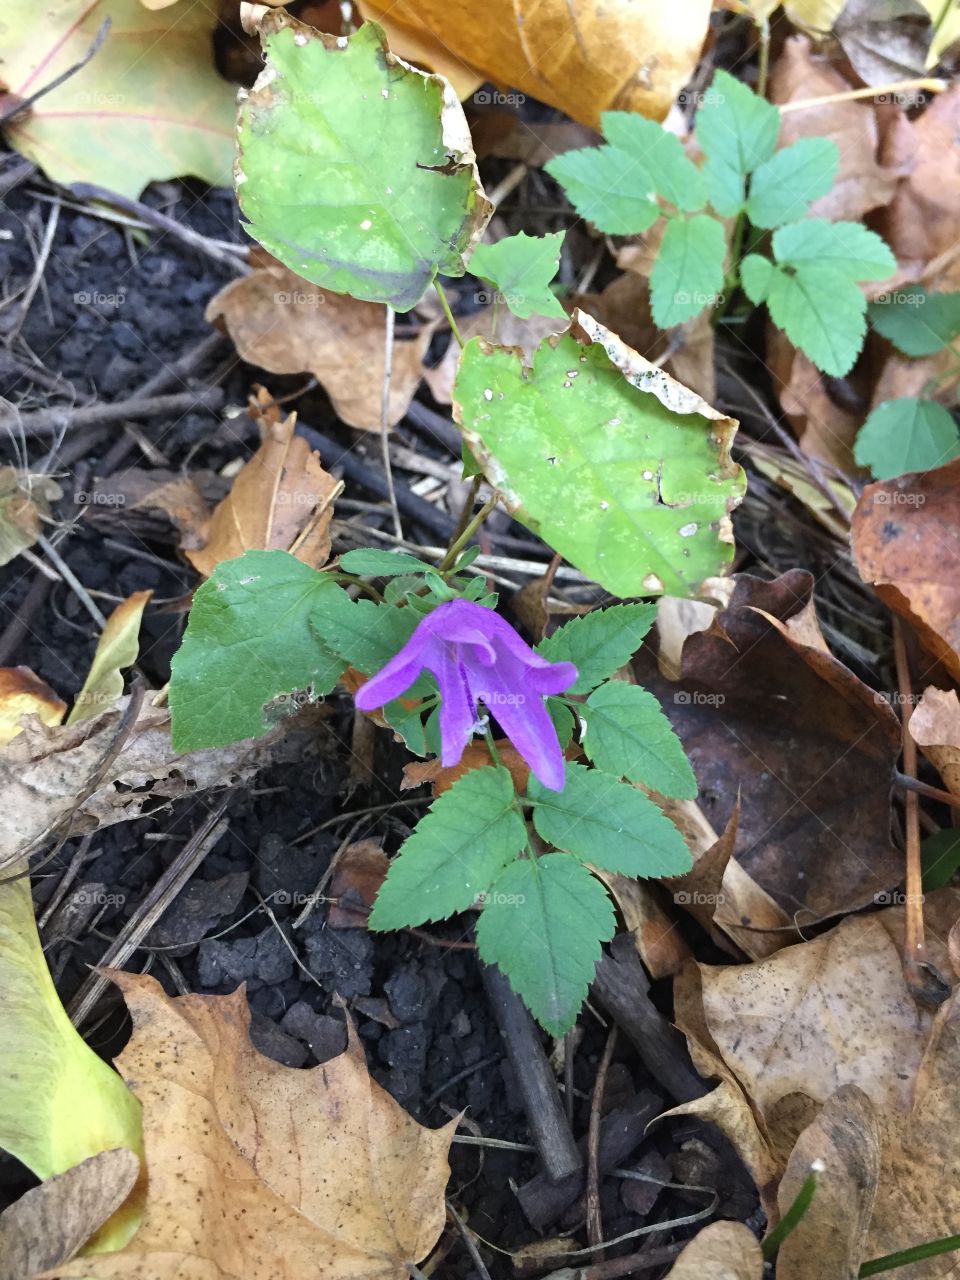 the last flower bell late in the fall in the forest